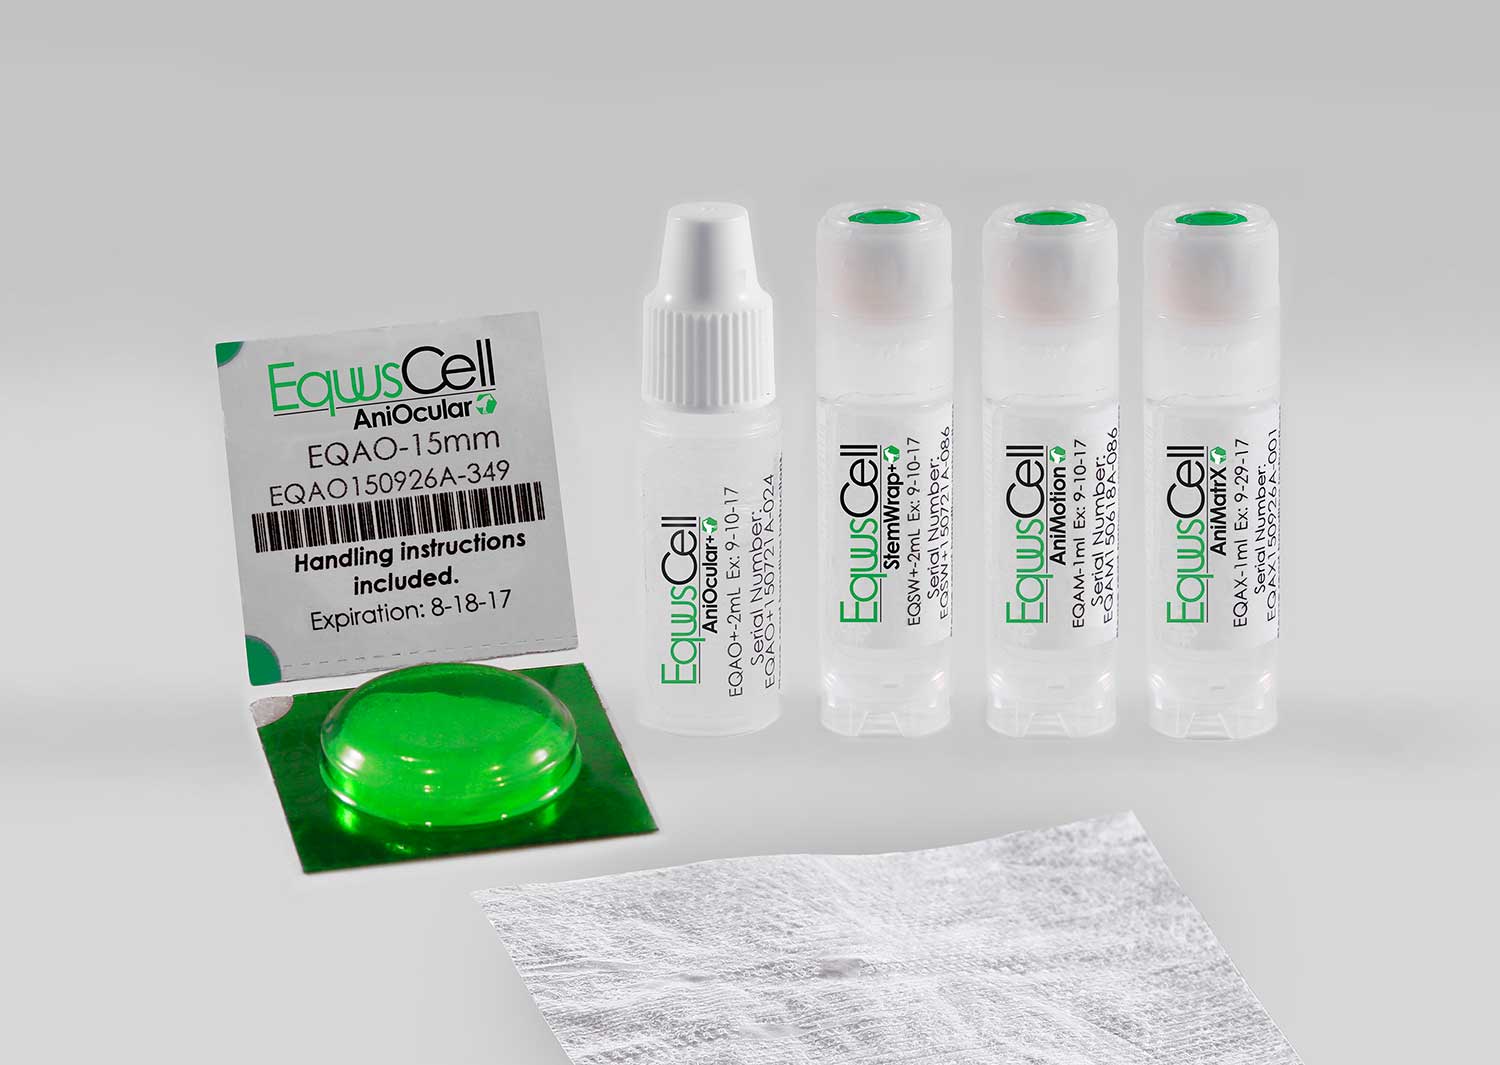 AniCell EquusCell Products